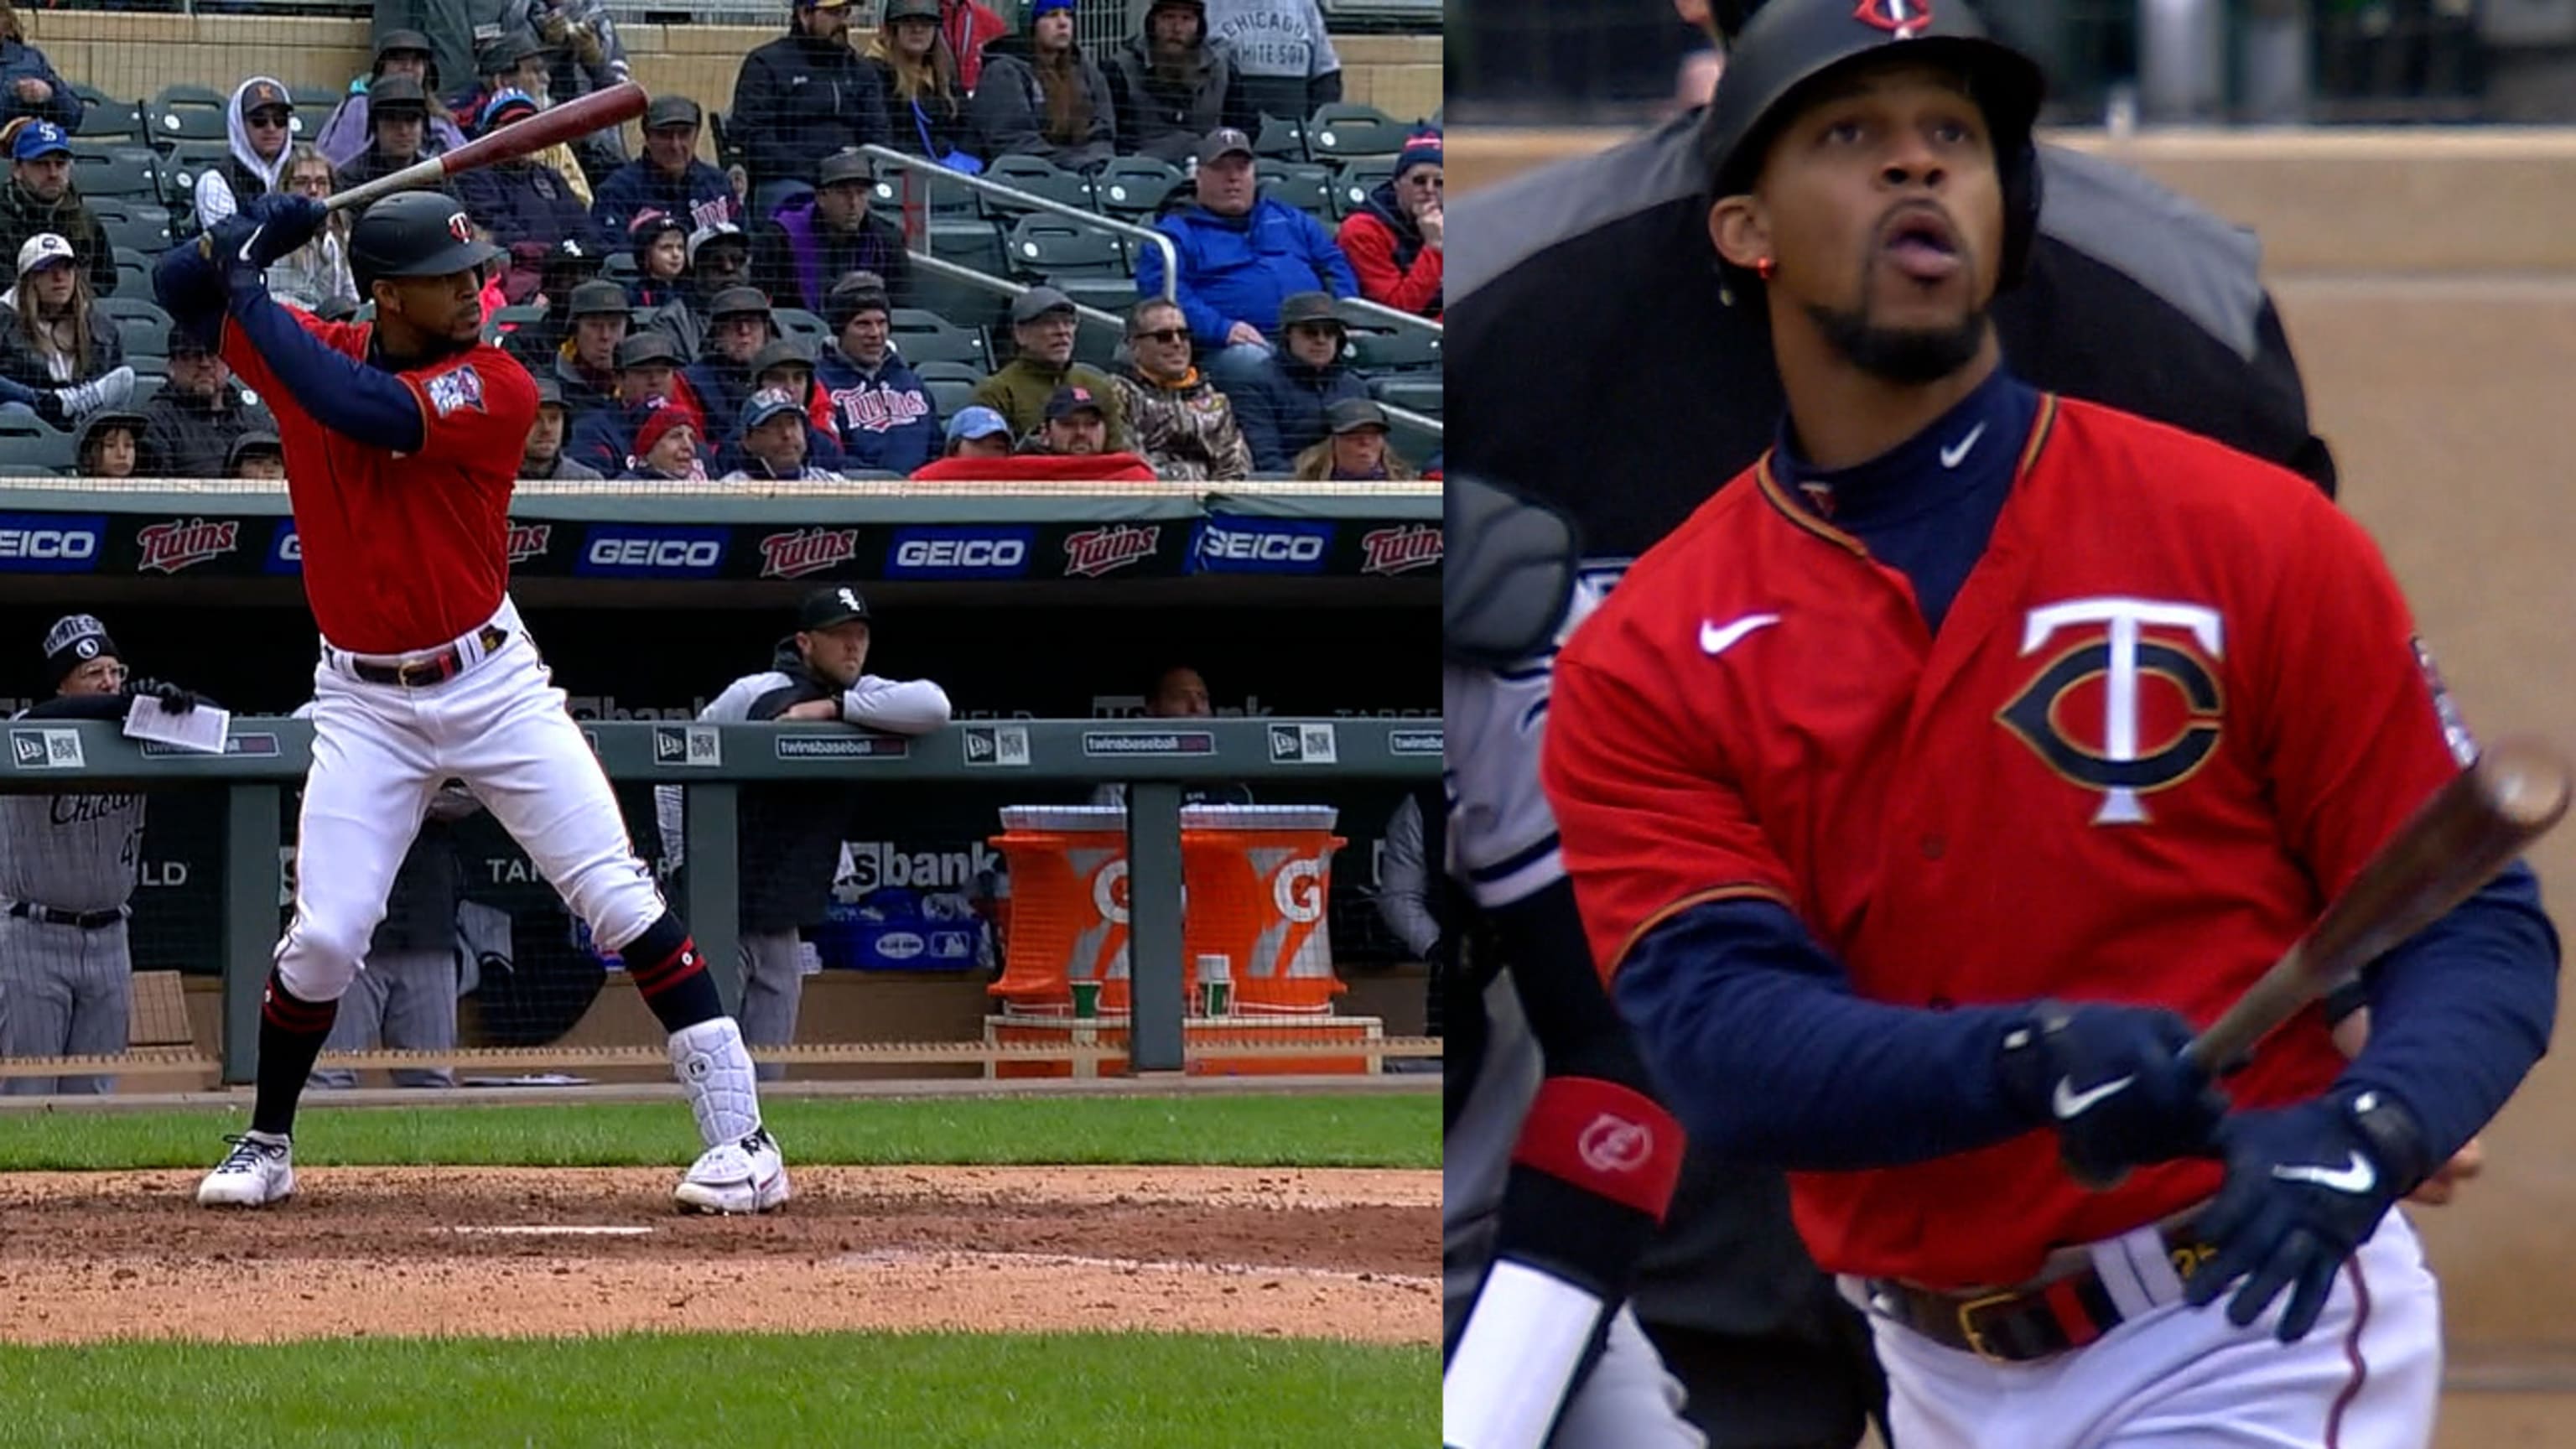 Byron Buxton makes history with walk-off homer